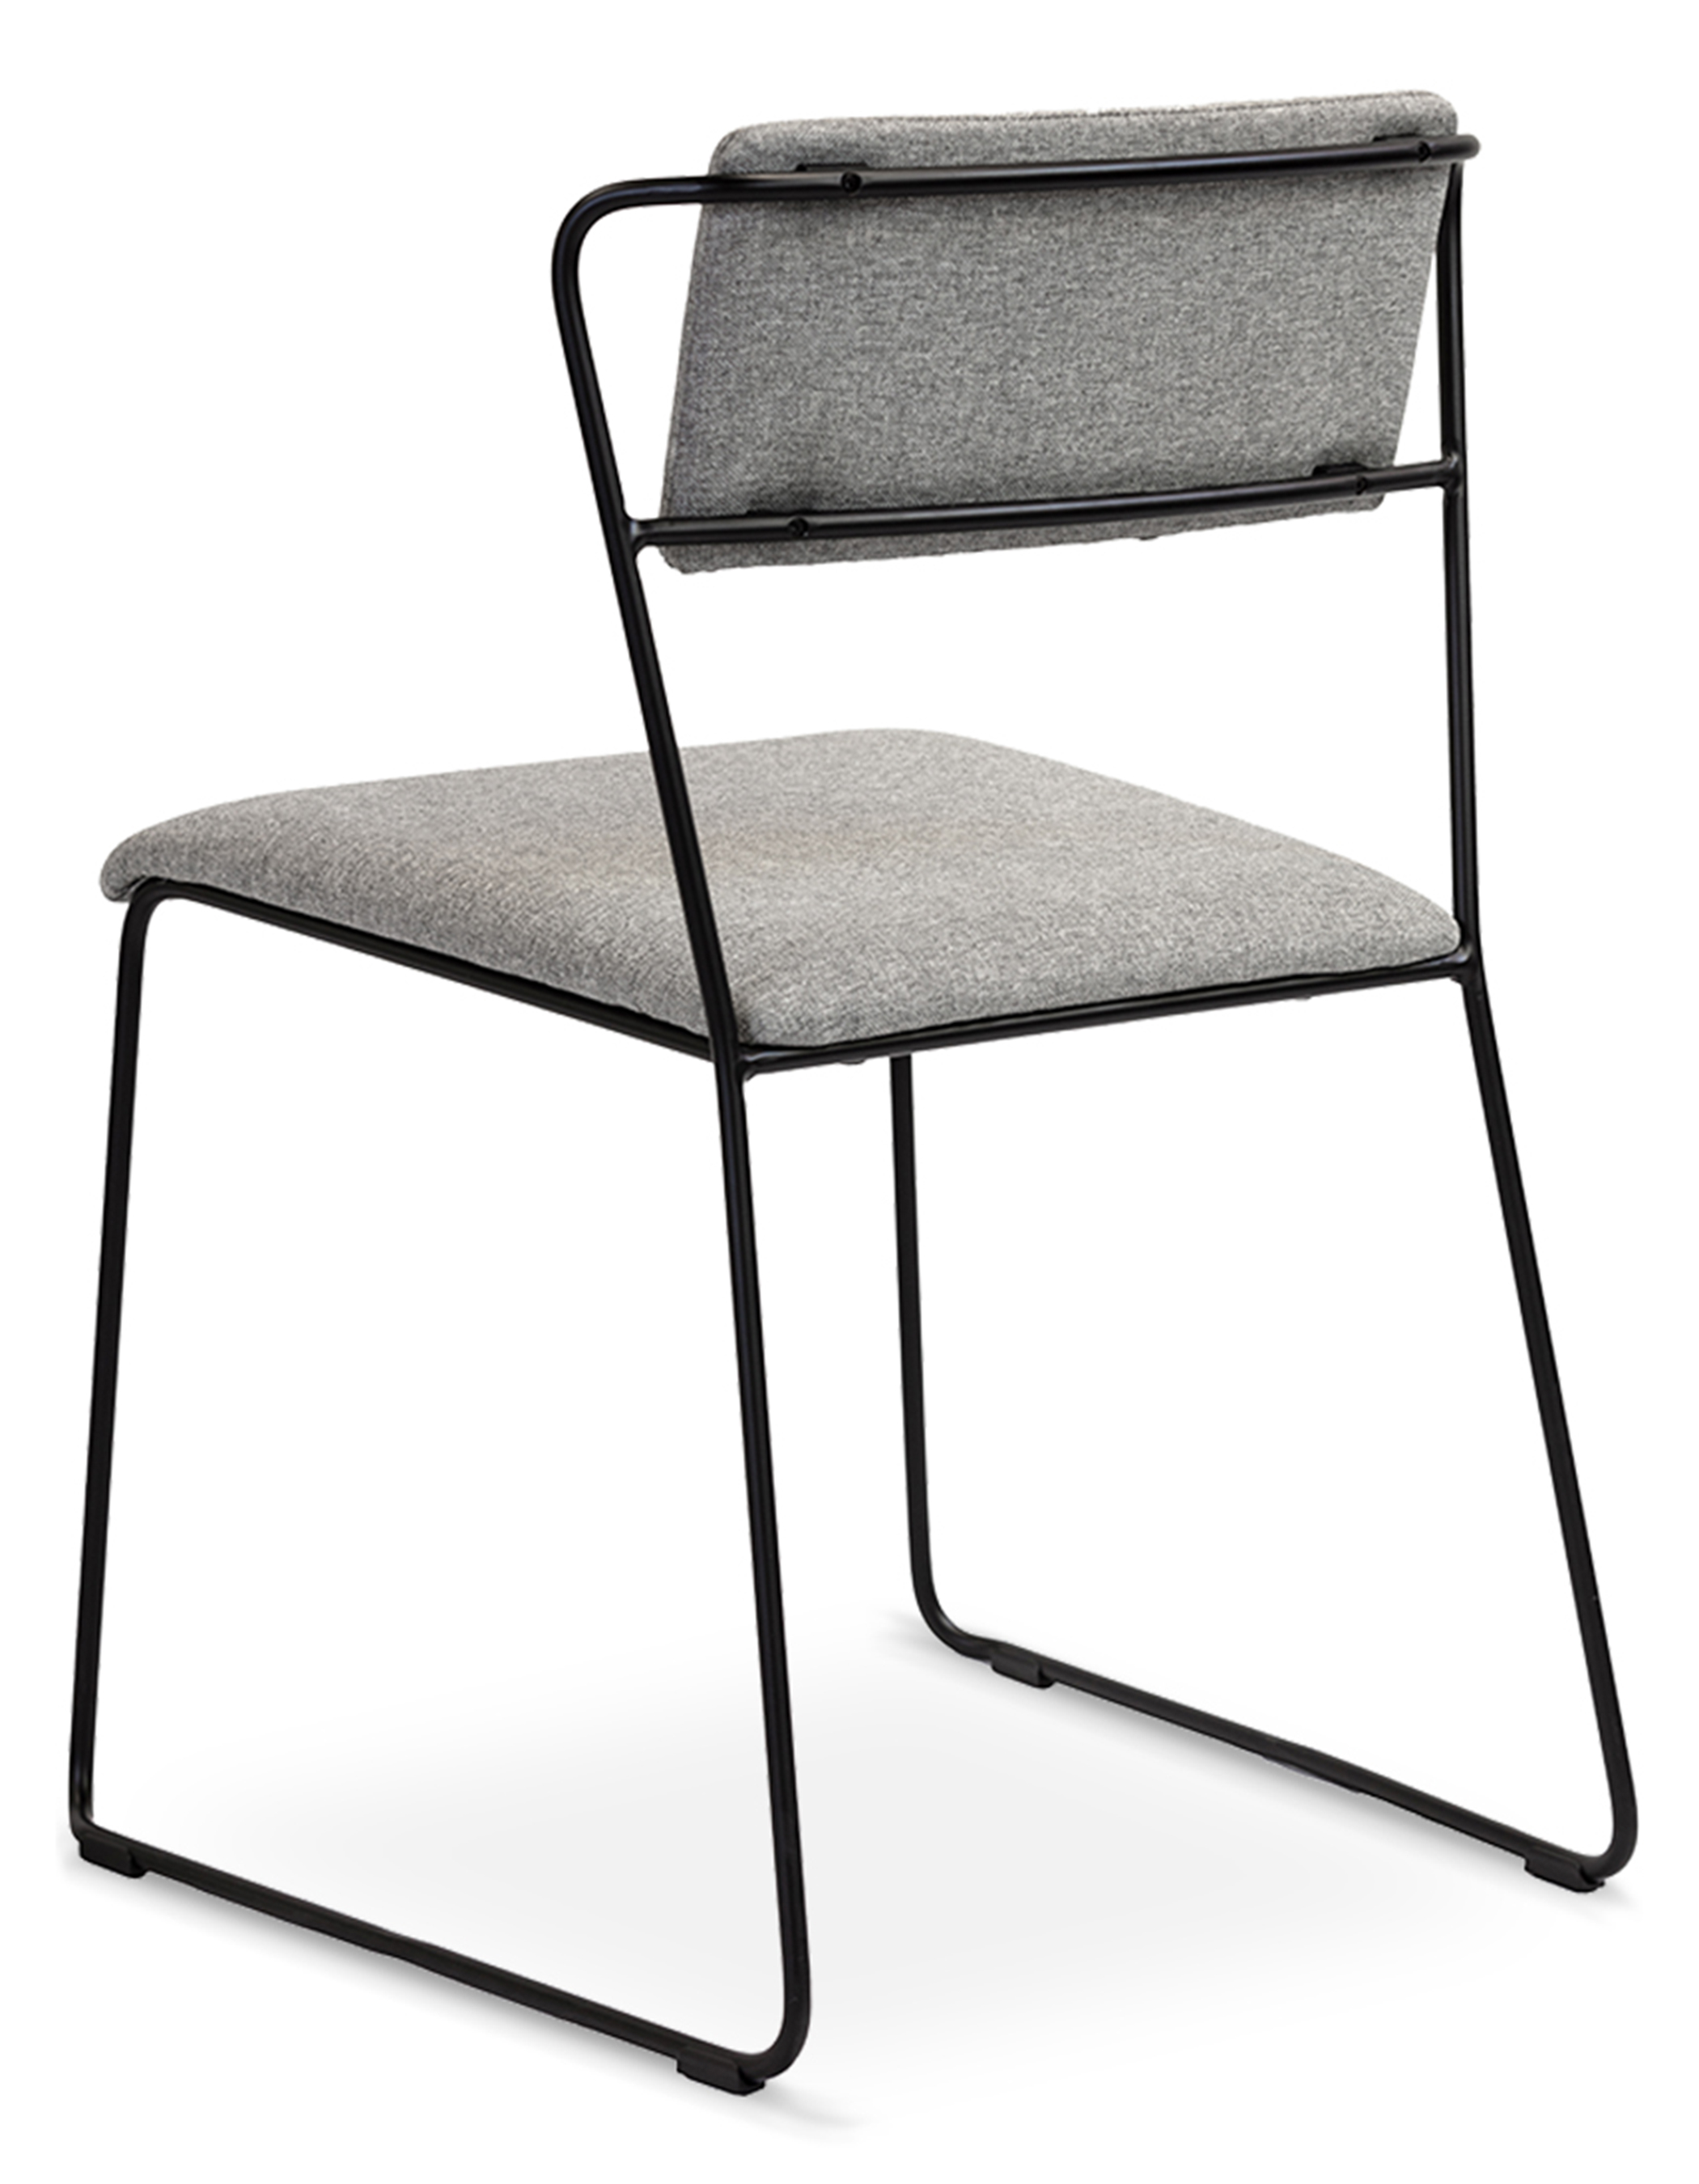 WS - Transit chair - Full Upholstery (Back angle)